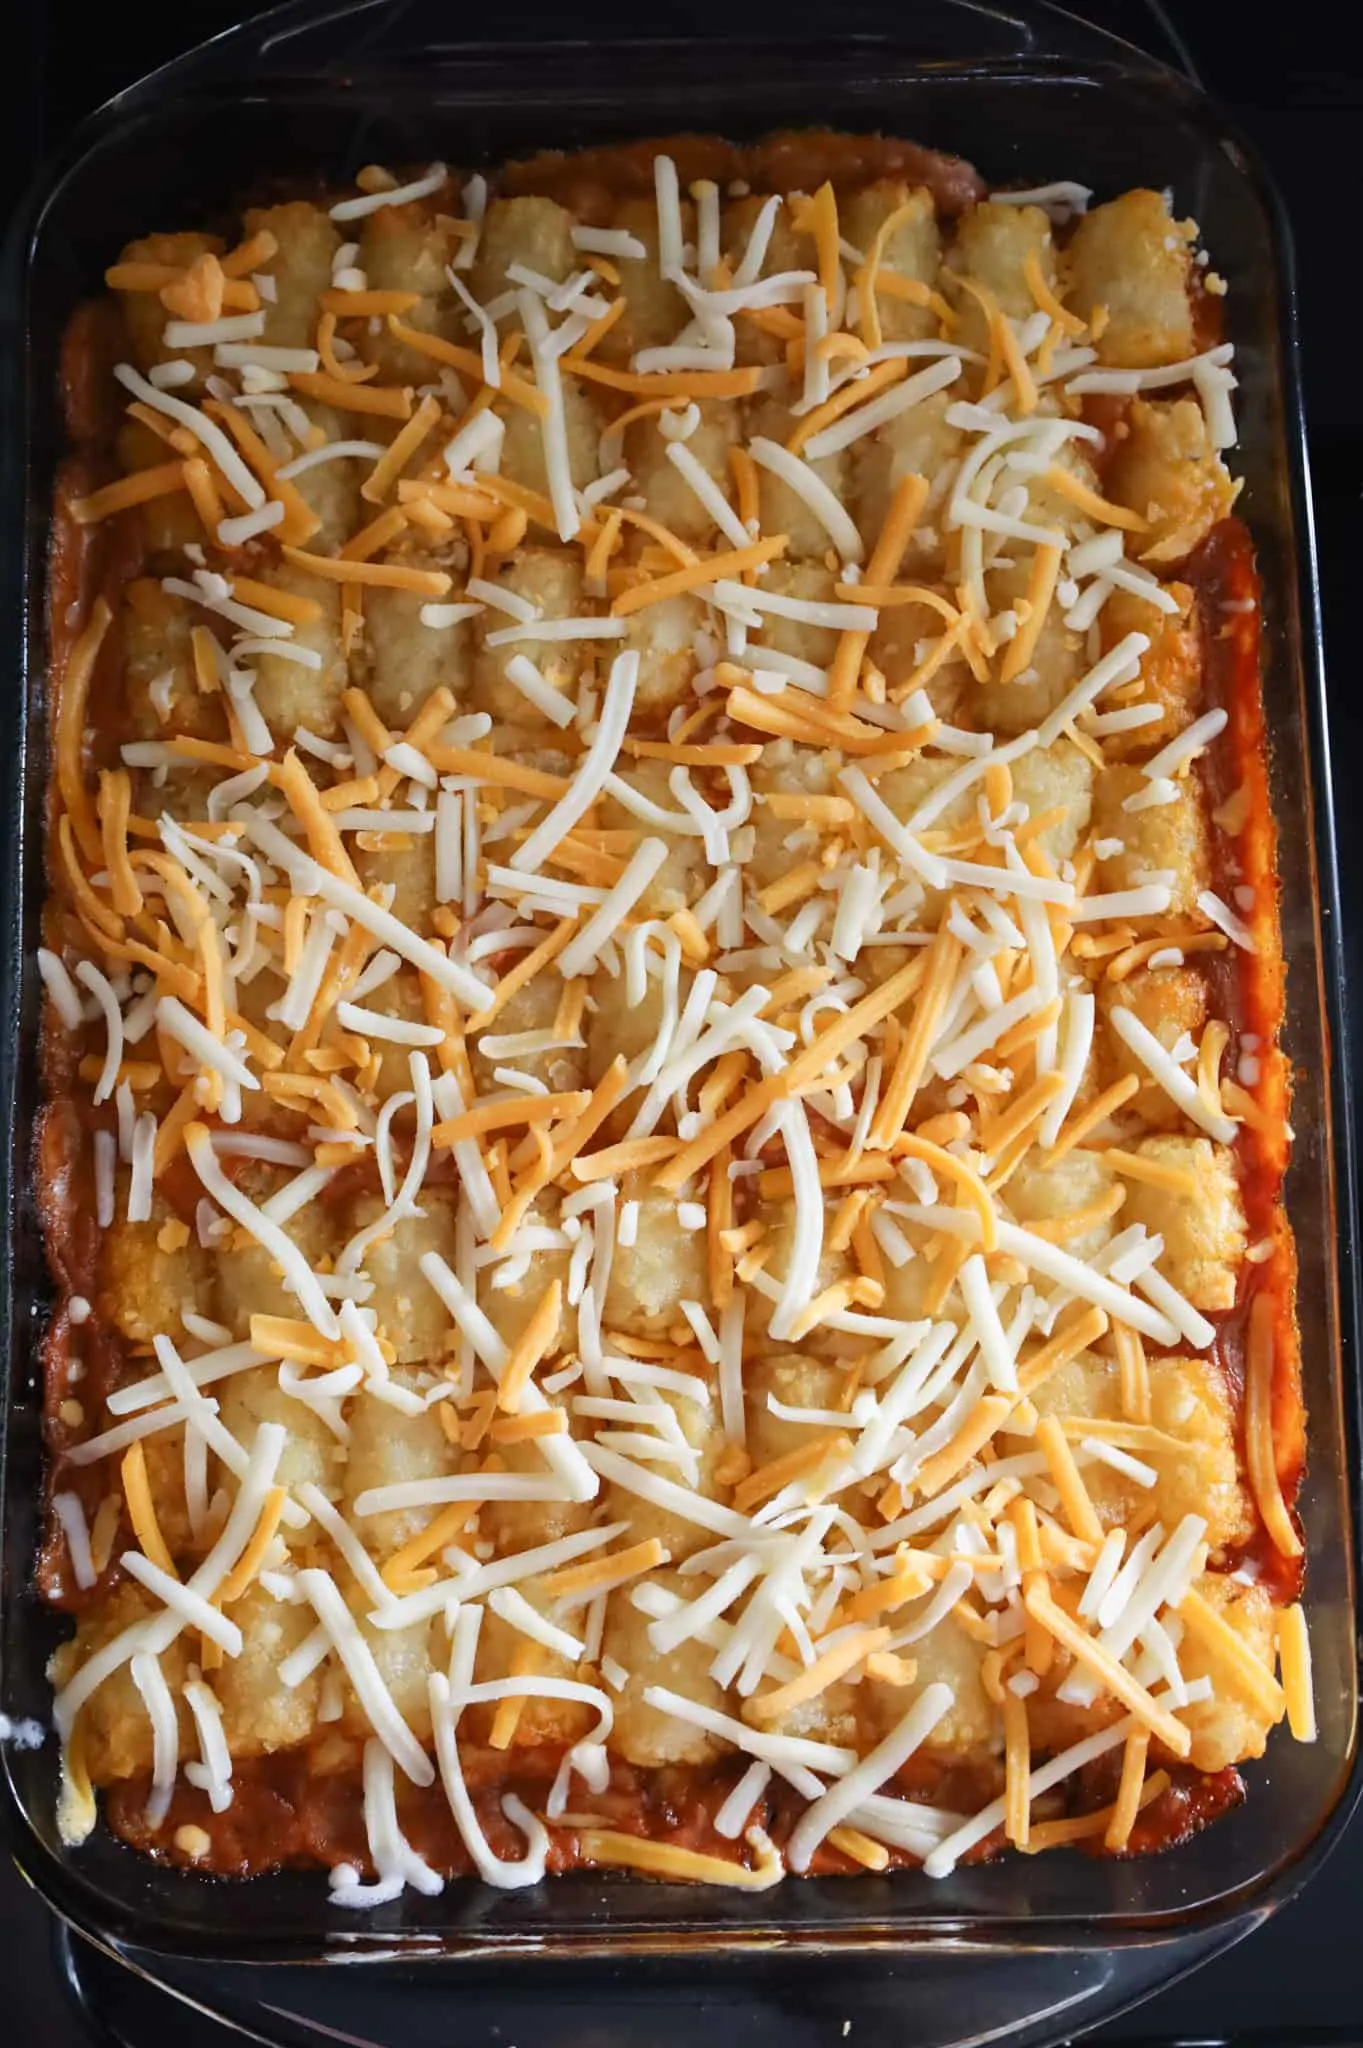 shredded cheddar cheese on top of tater tot casserole